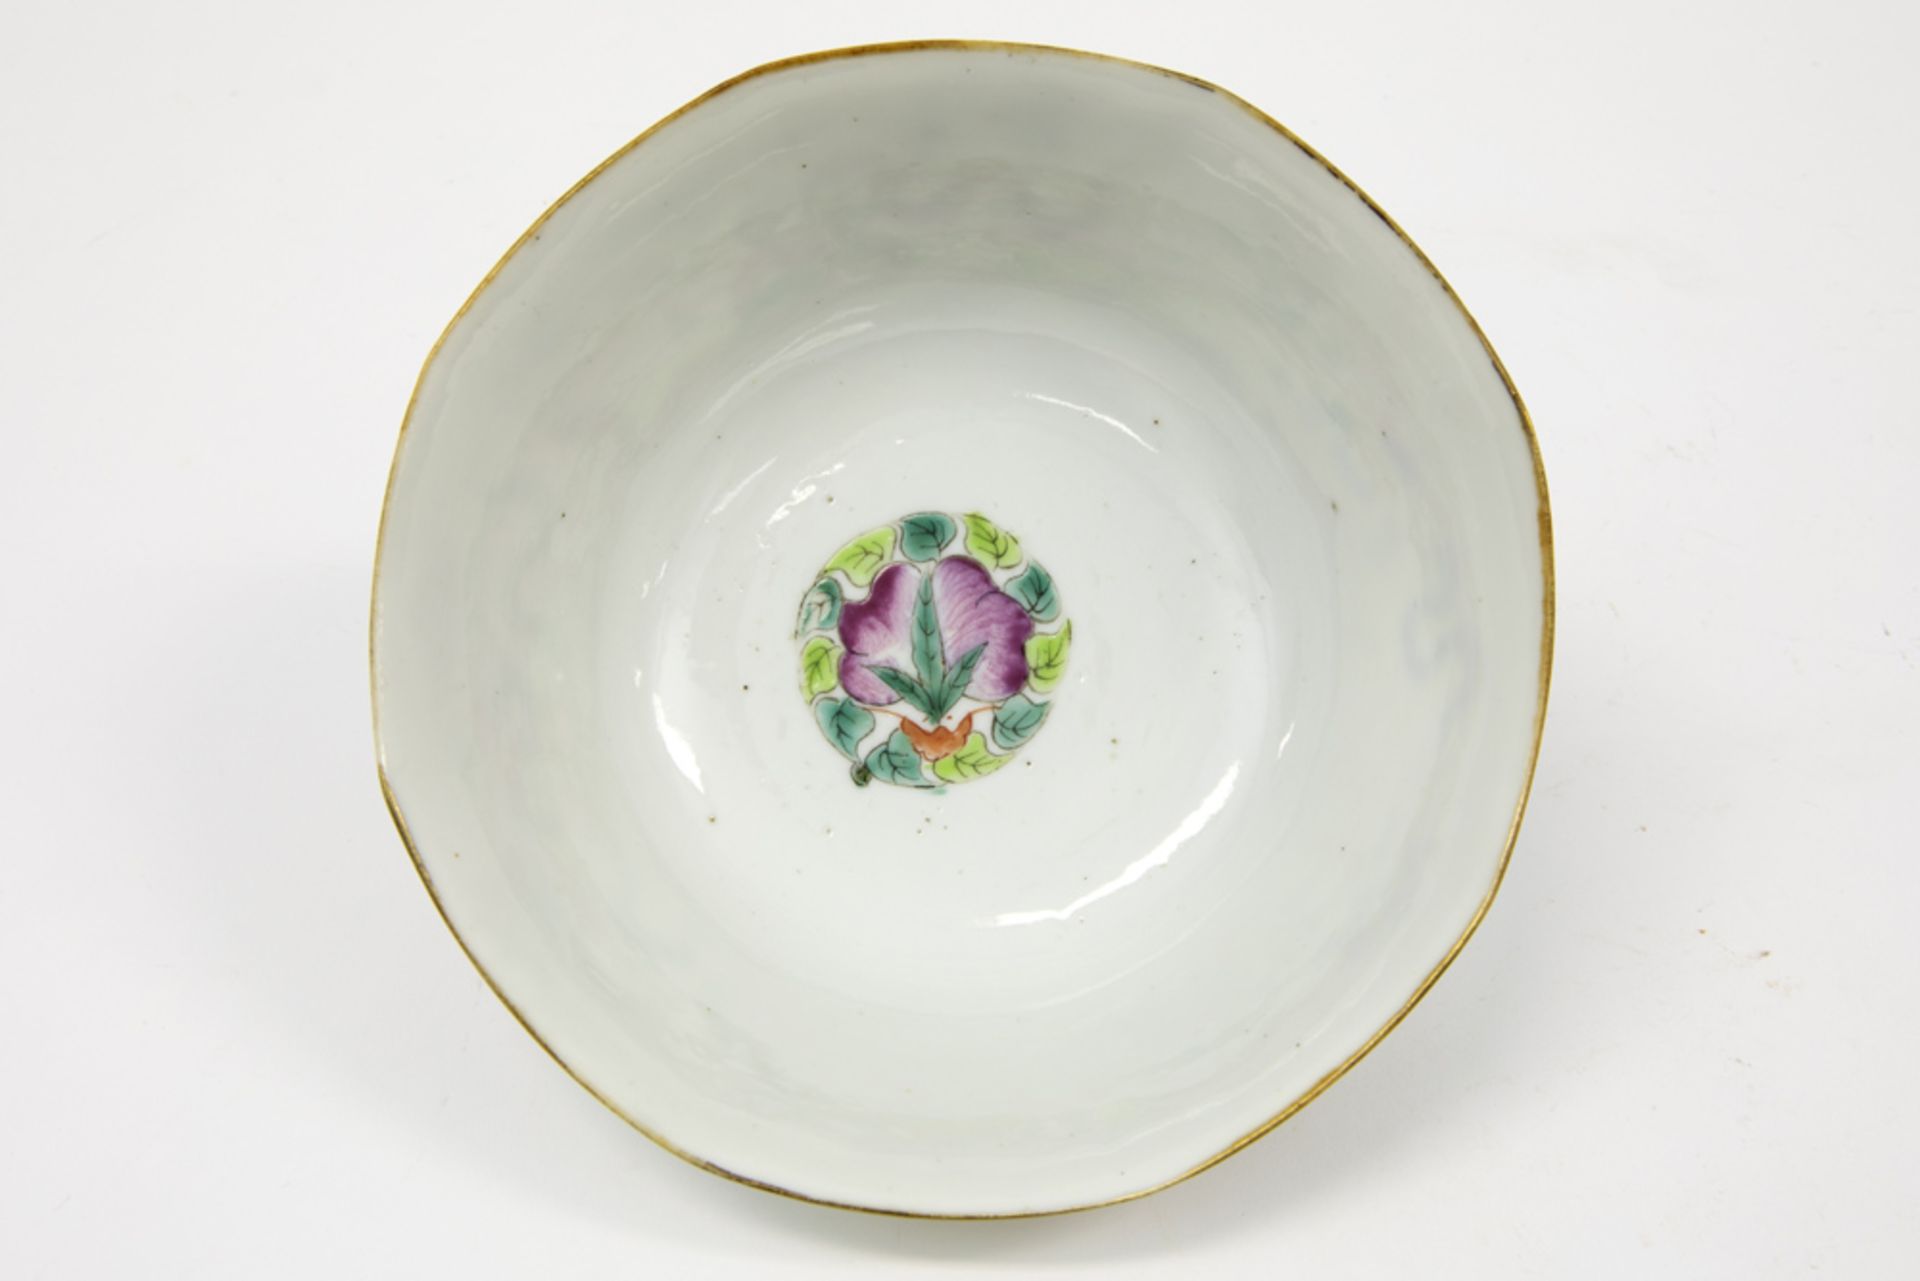 19th Cent. Chinese bowl in Hsien Feng (Xian Feng) marked porcelain with a polychrome decor || - Image 5 of 7